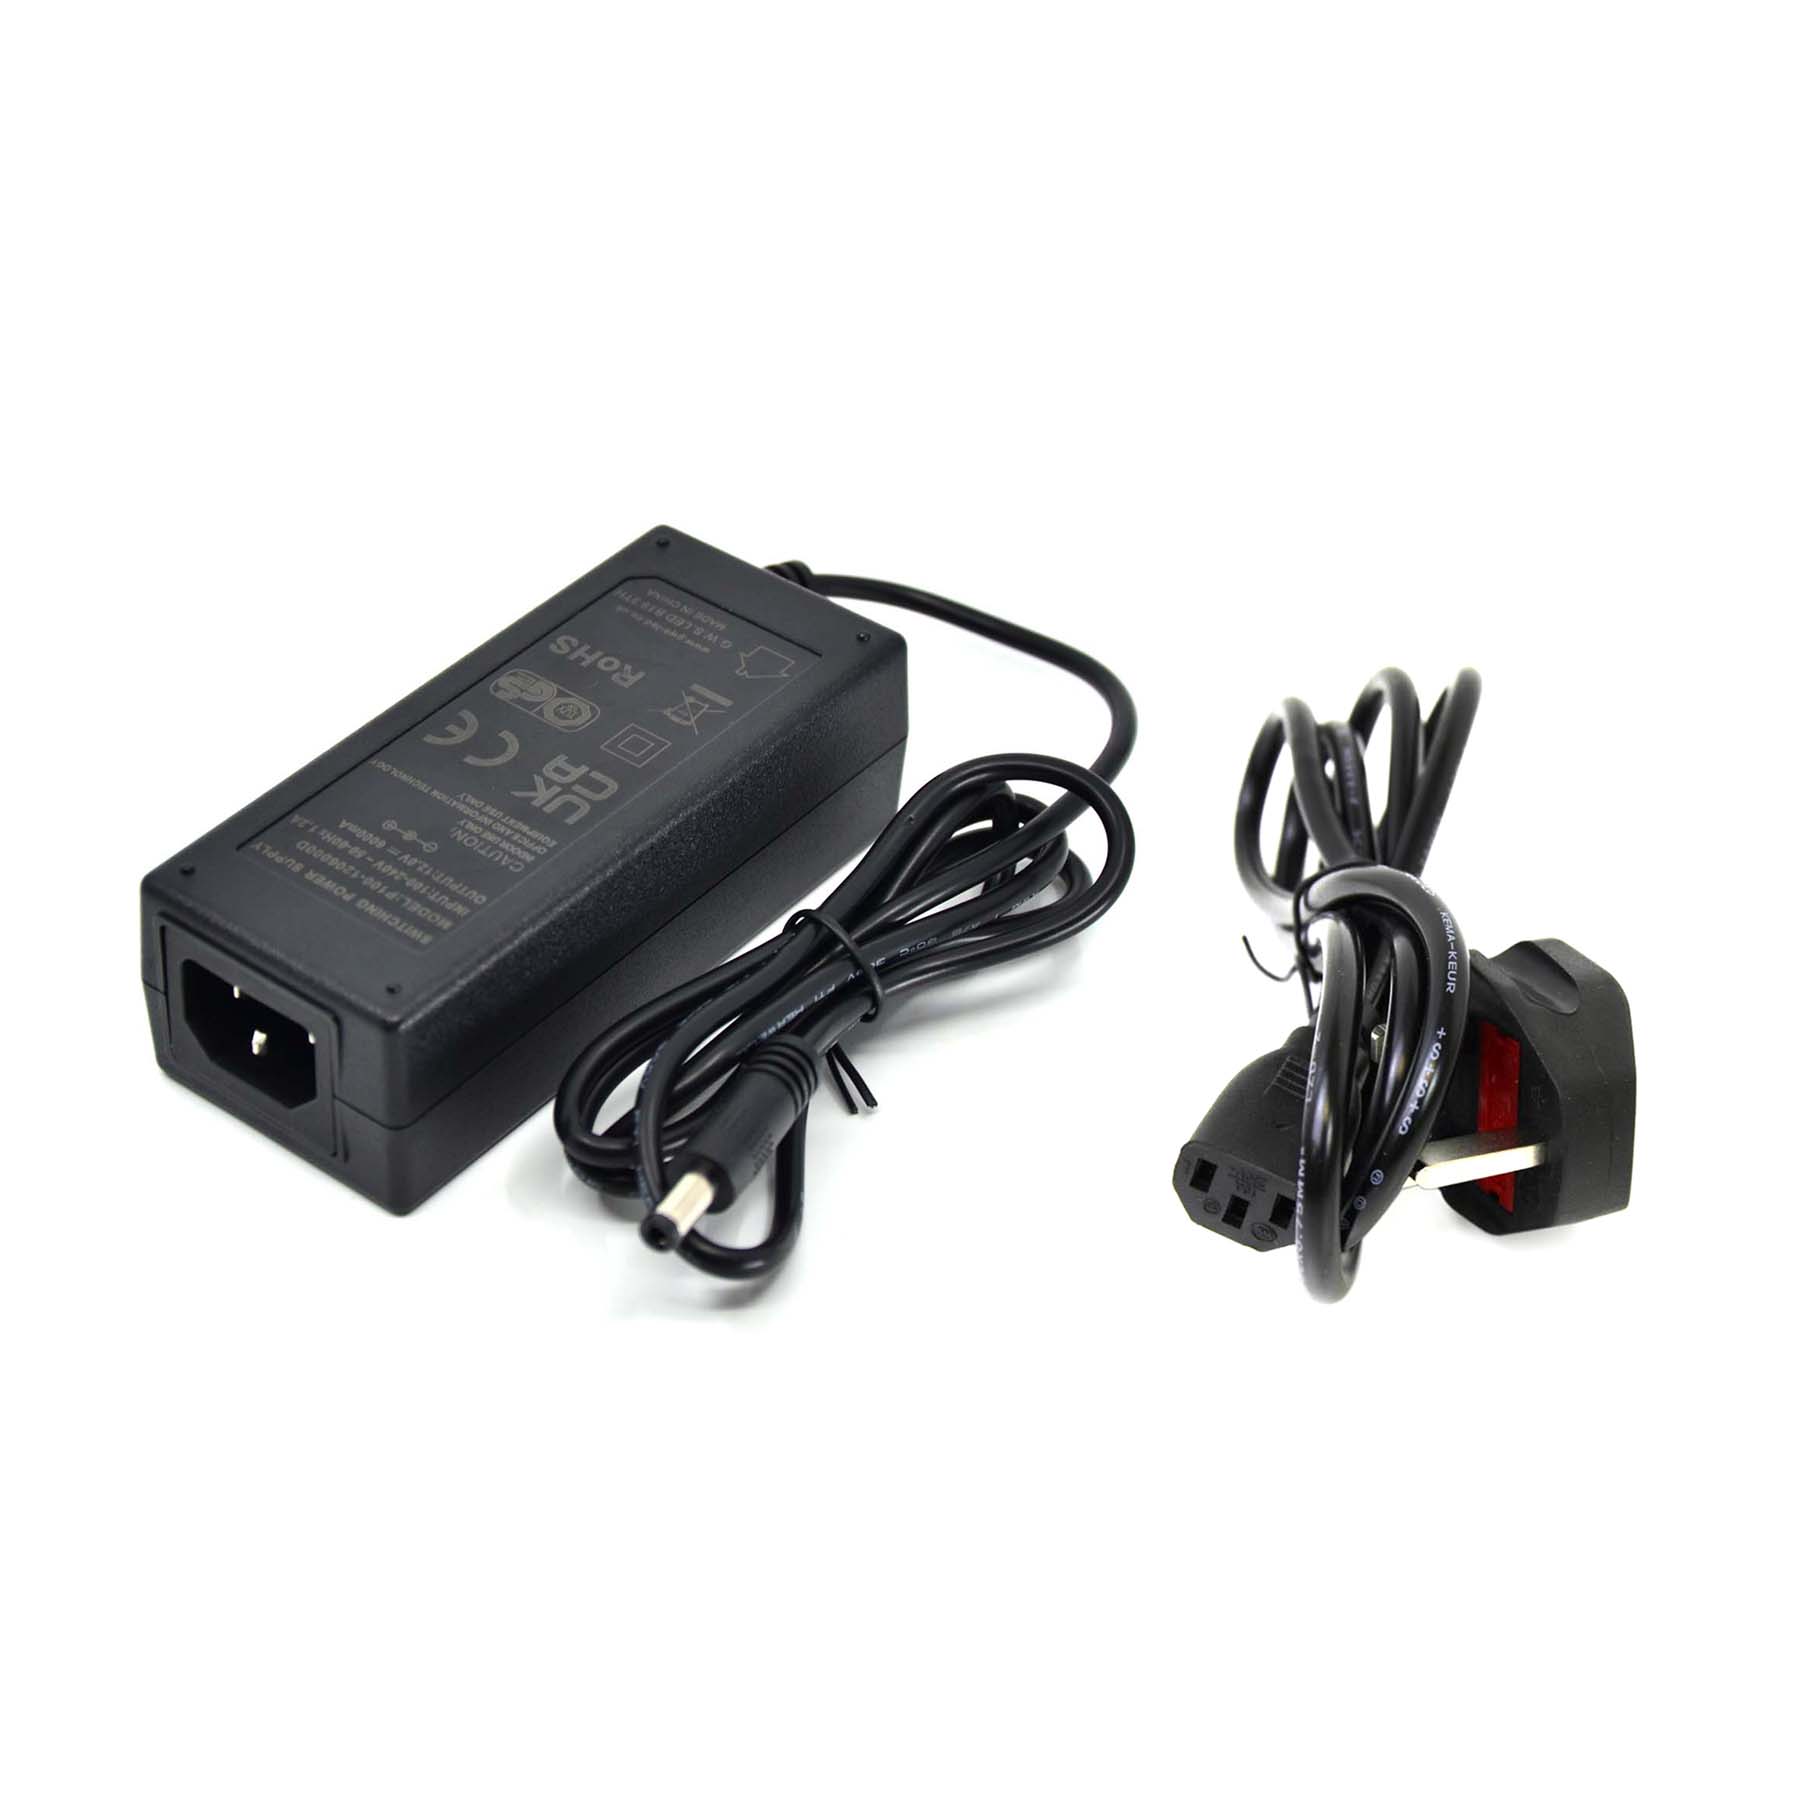 Buy 12V 6A Power Supply Adapter AC Adapter 100 240V 50 60HZ DC 12 Volt 6A  72W Power Converter Transformer Charger 6amp 55mm x 25mm DC Plug for LED  Strips Lighting Router